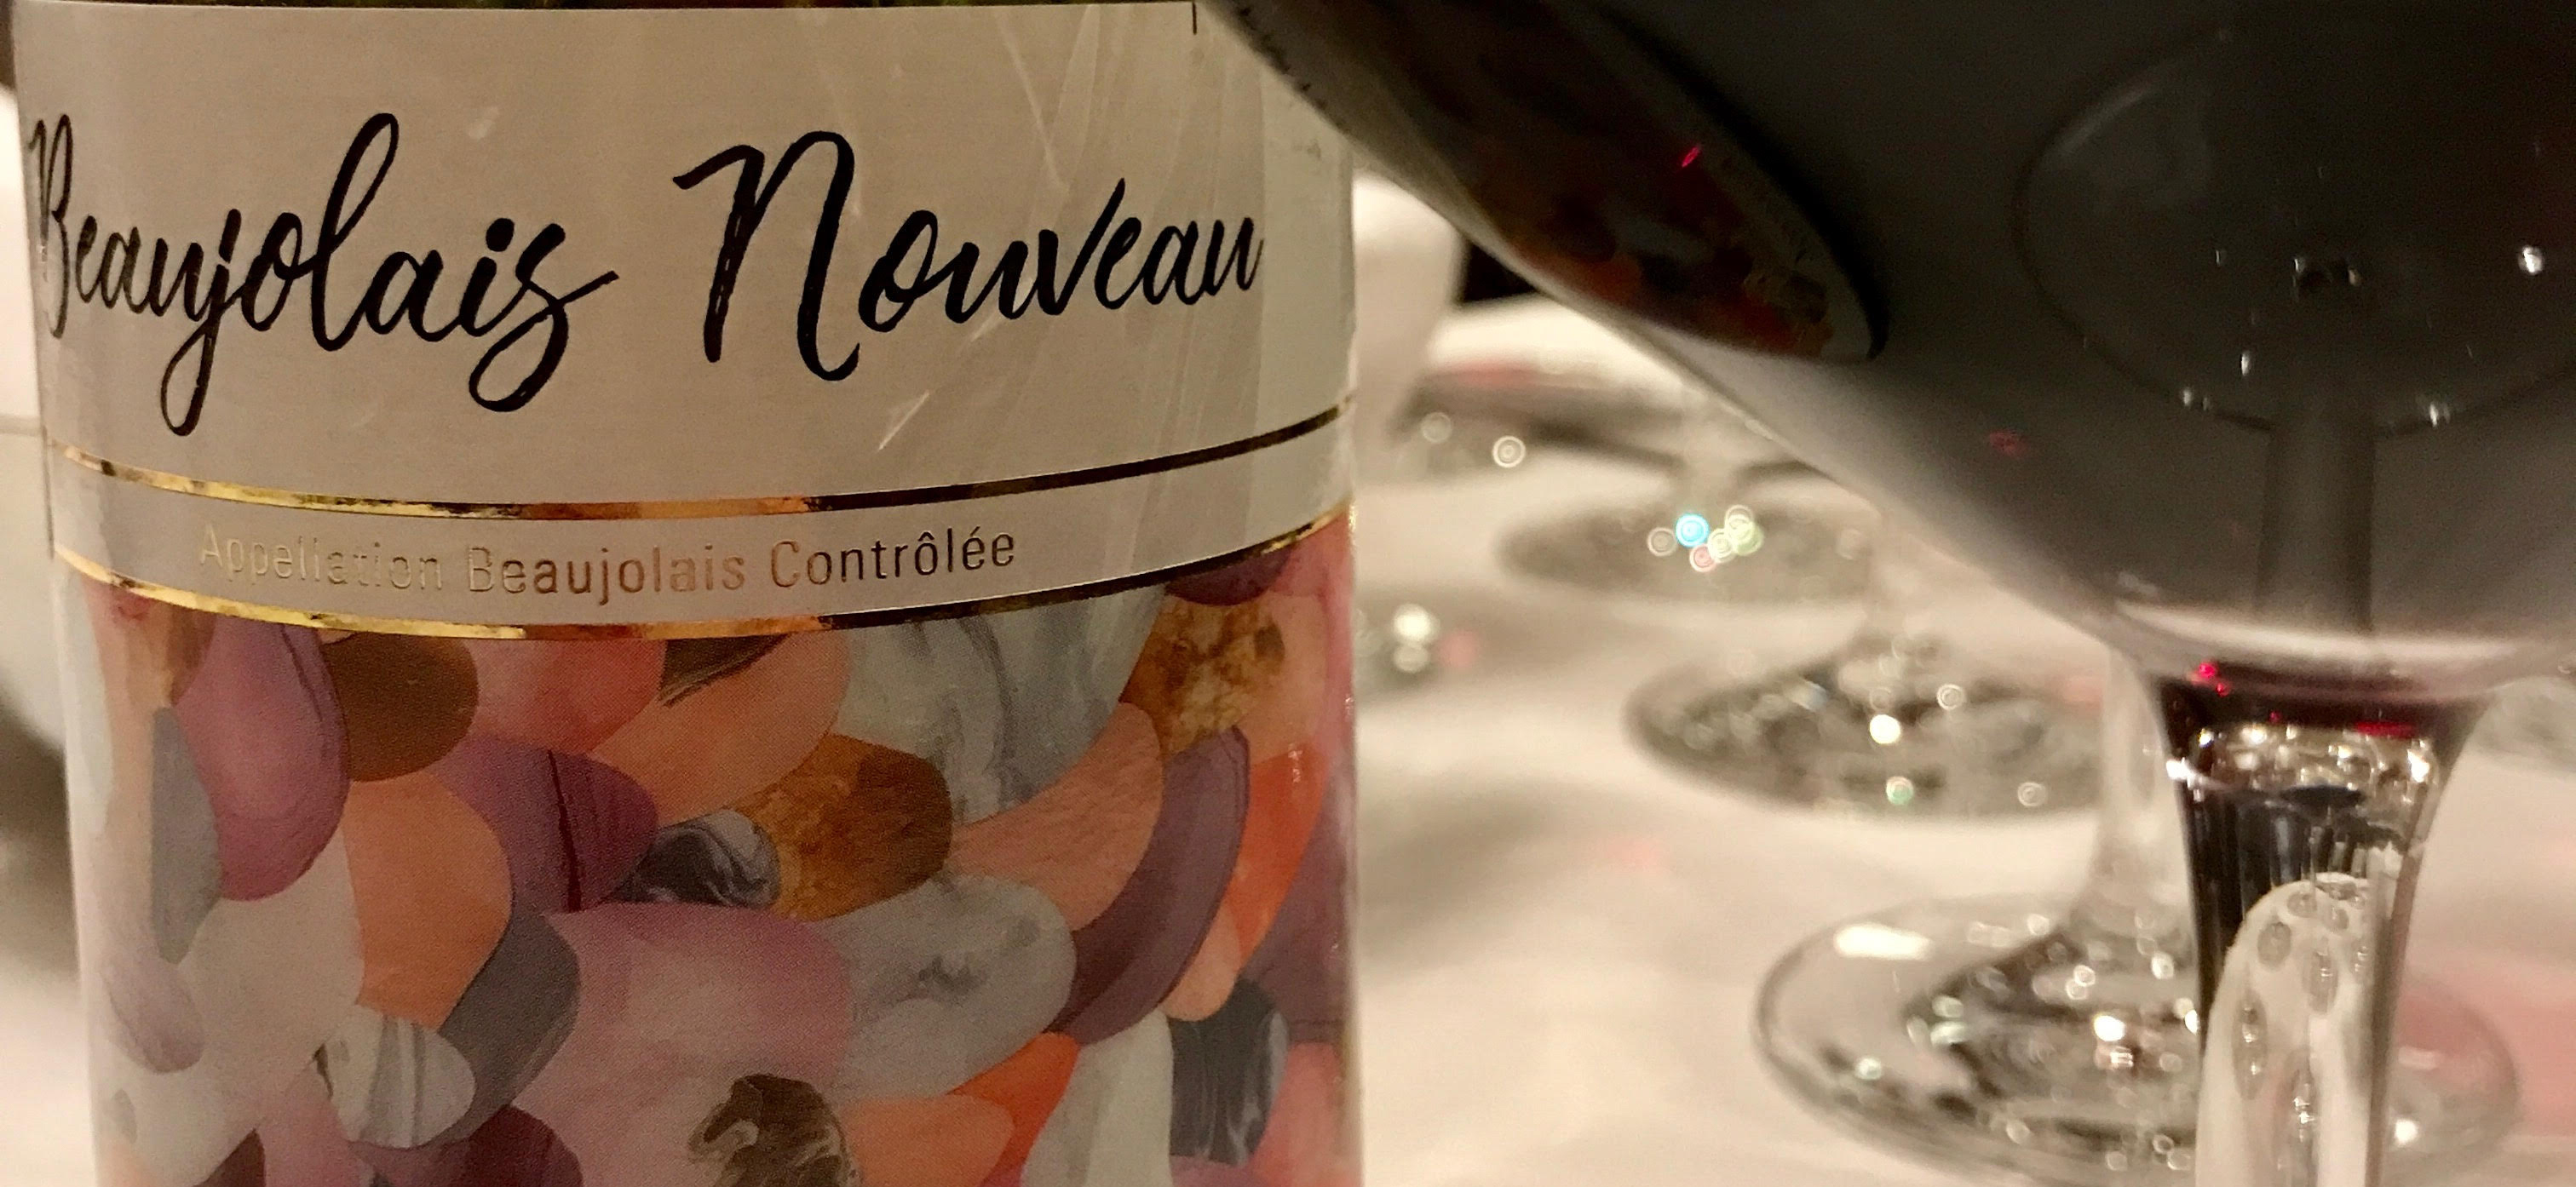 Franck Duboeuf And the Marketing Miracle That Is Beaujolais Nouveau